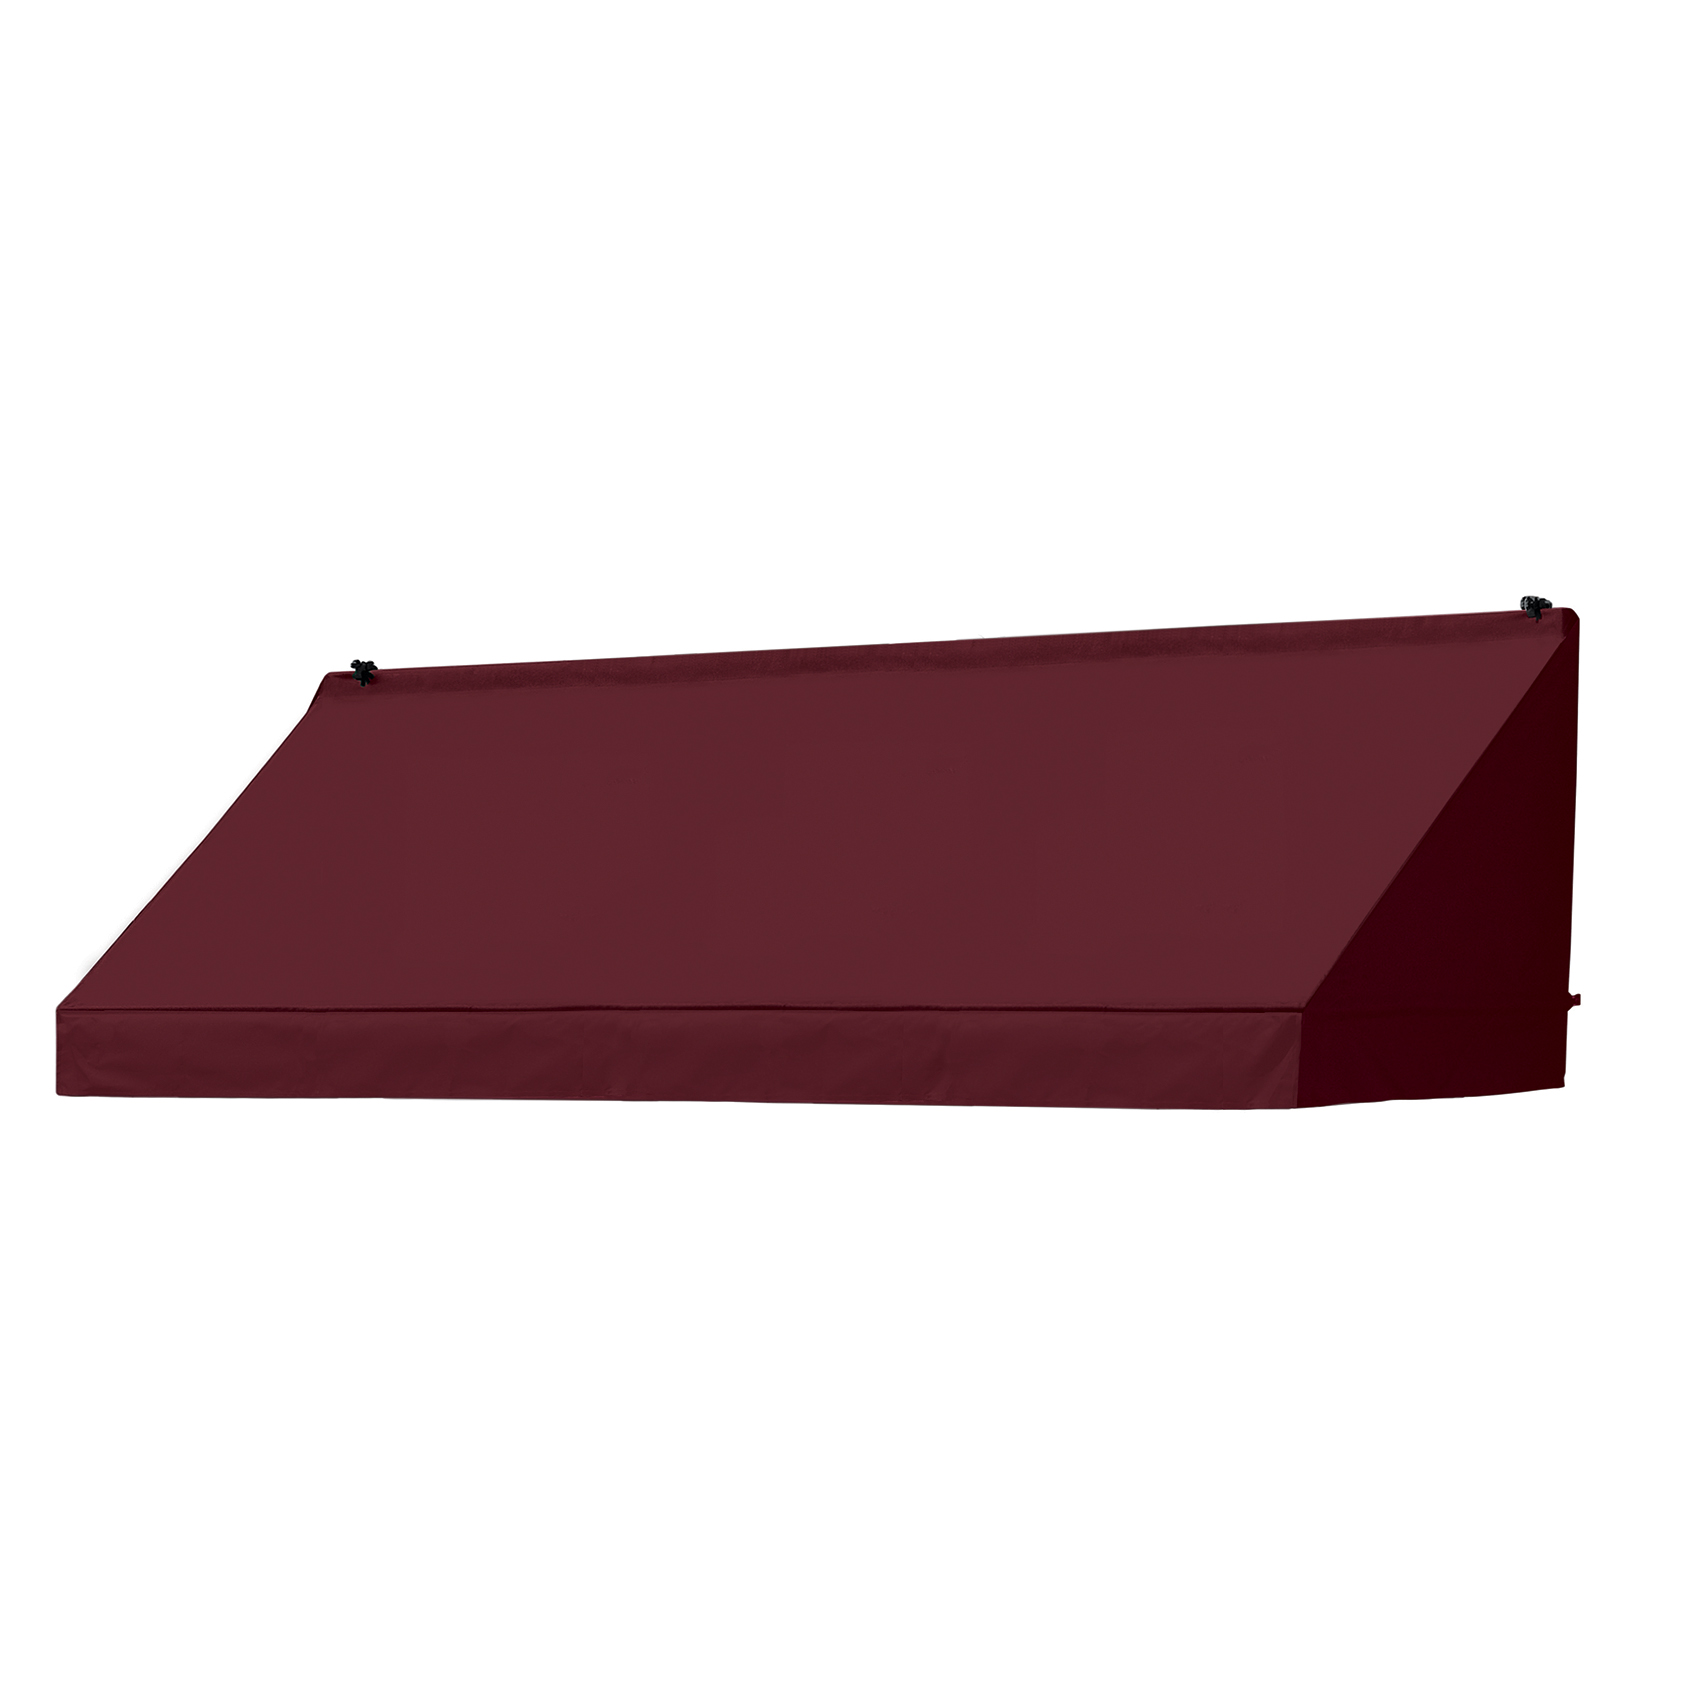 UPC 799870462840 product image for Awnings in a Box® 8' Classic Style Awning in Assorted Colors | upcitemdb.com